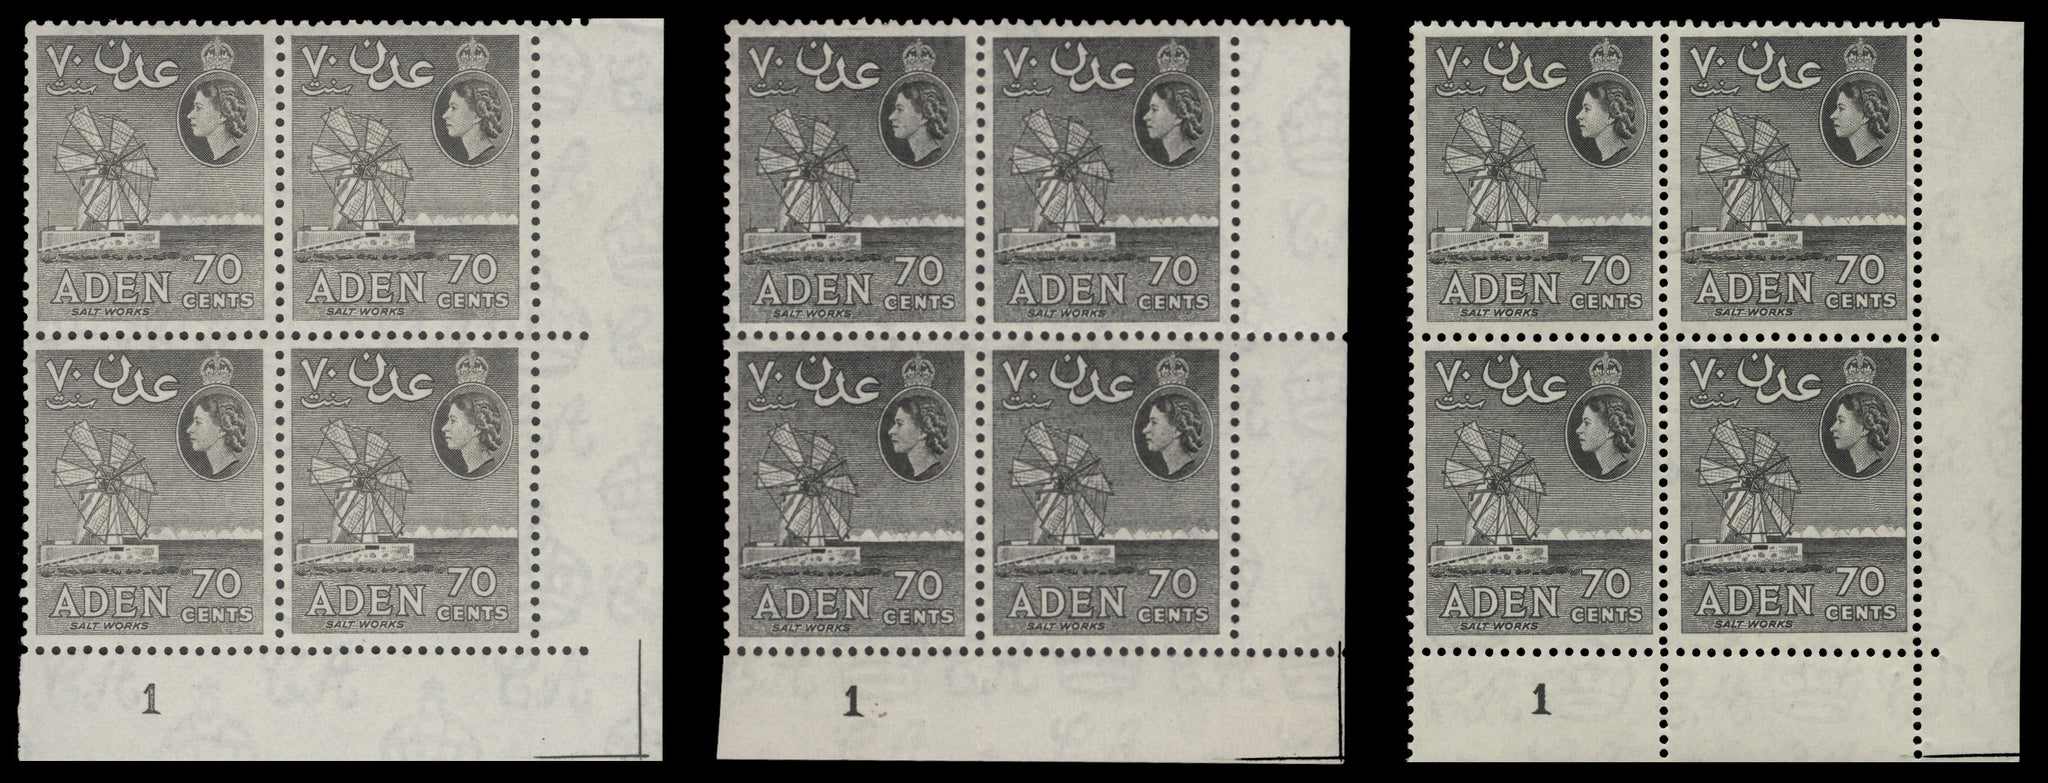 70c Salt Works plate 1 blocks printed by Waterlow in brown-grey and black. The first two perf 12 x 12 and the rightmost perf 12 x 13½